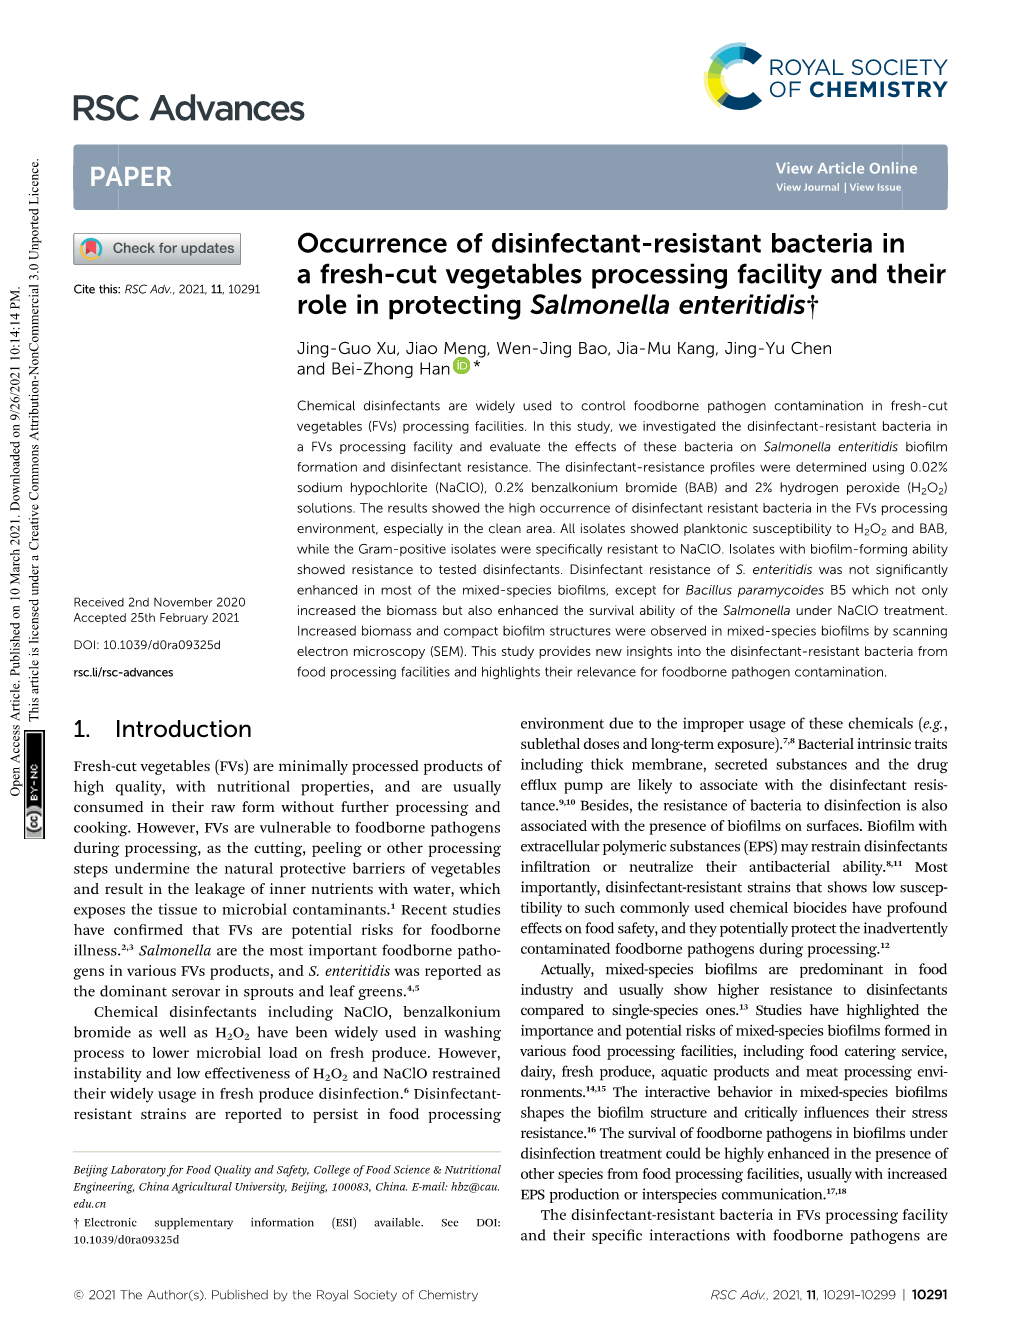 Occurrence of Disinfectant-Resistant Bacteria in a Fresh-Cut Vegetables